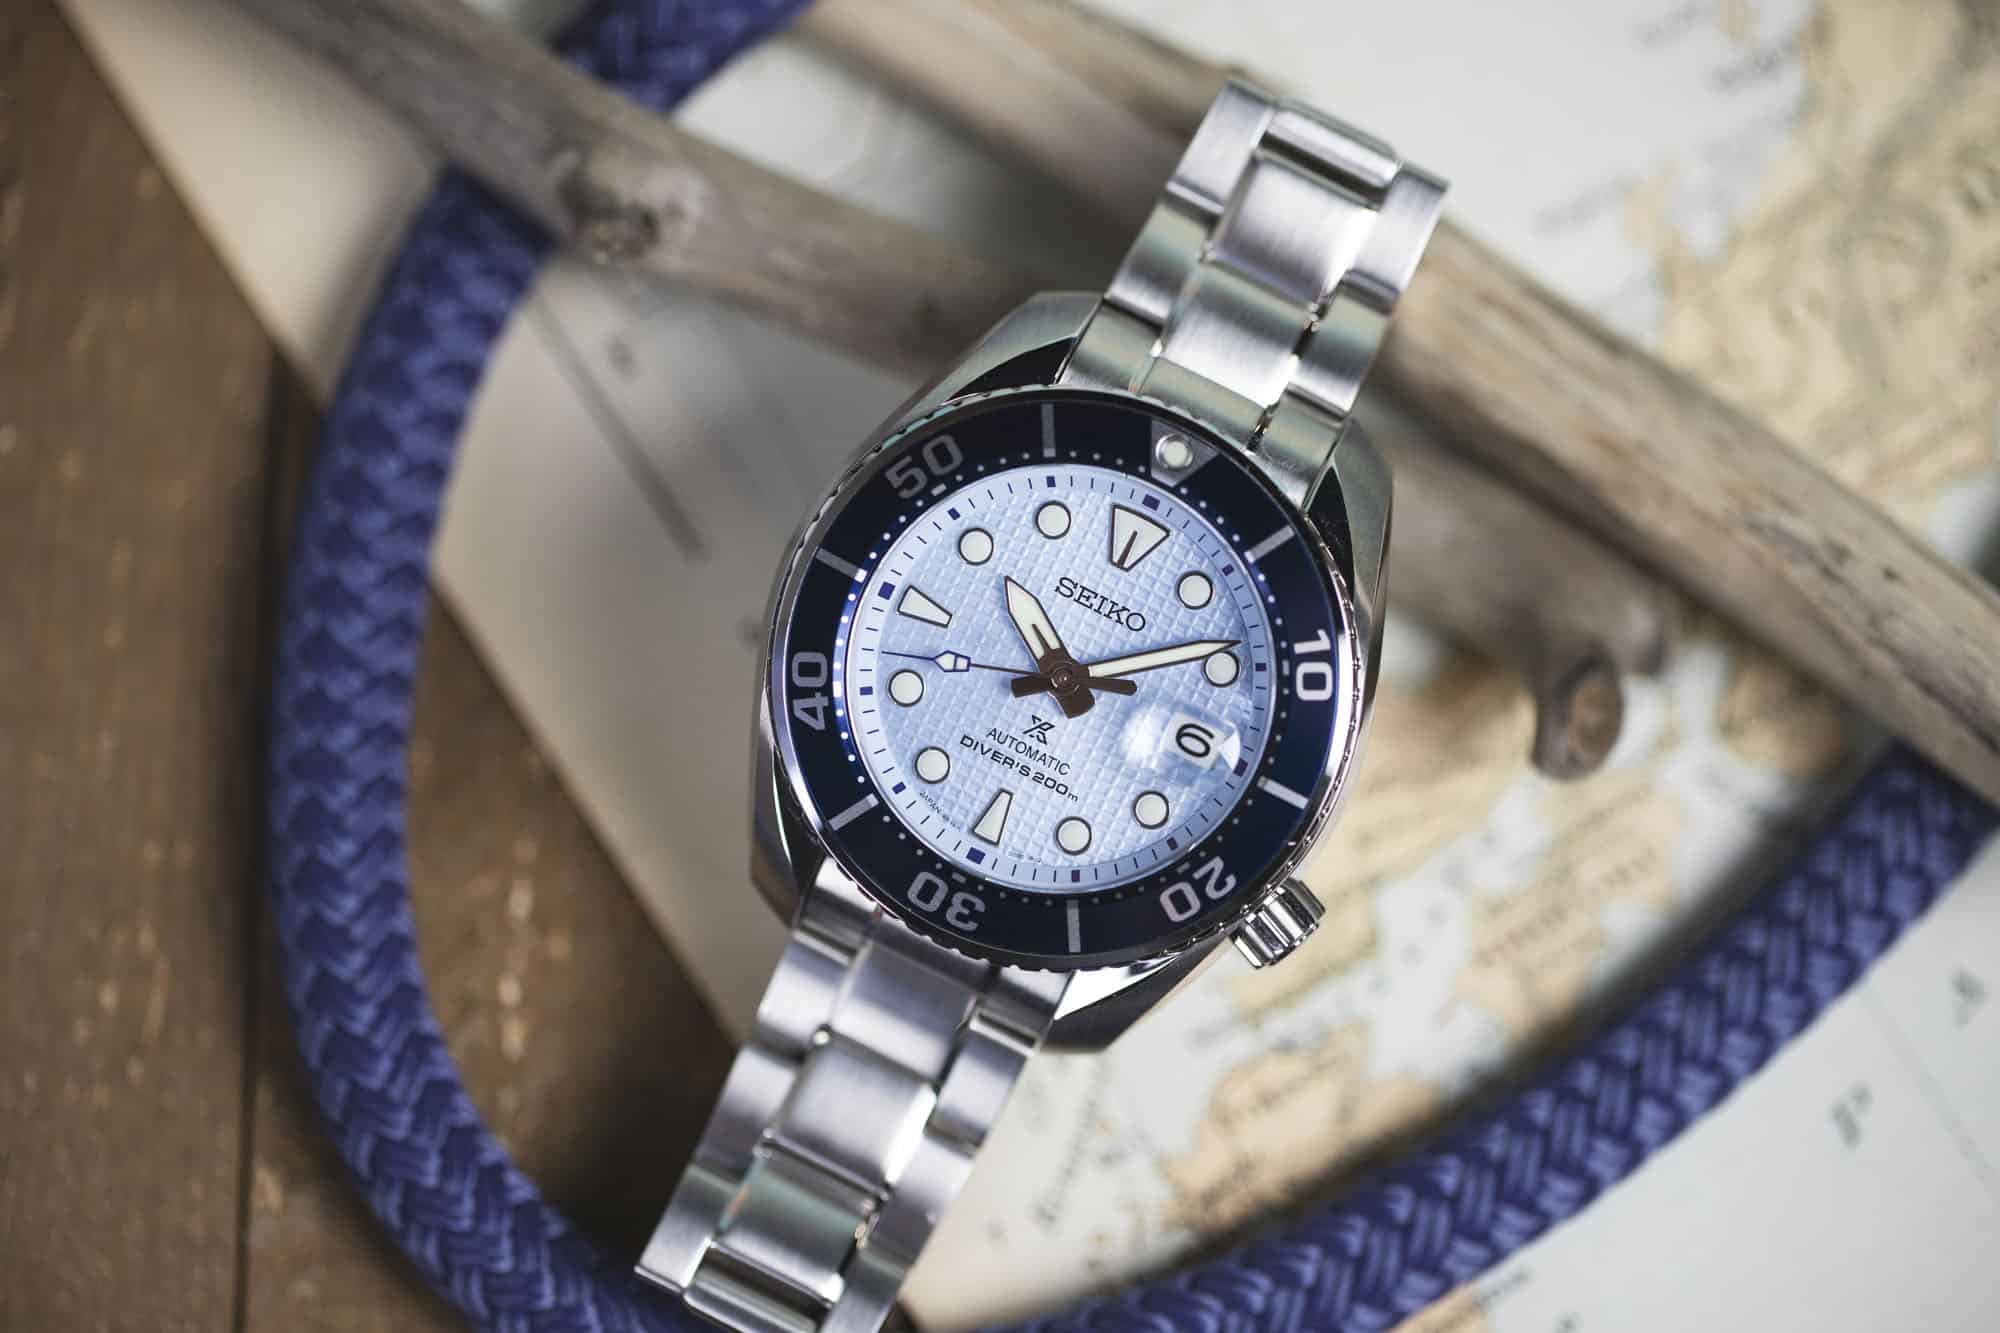 Video Interview: 55 Years of Seiko Dive Watches